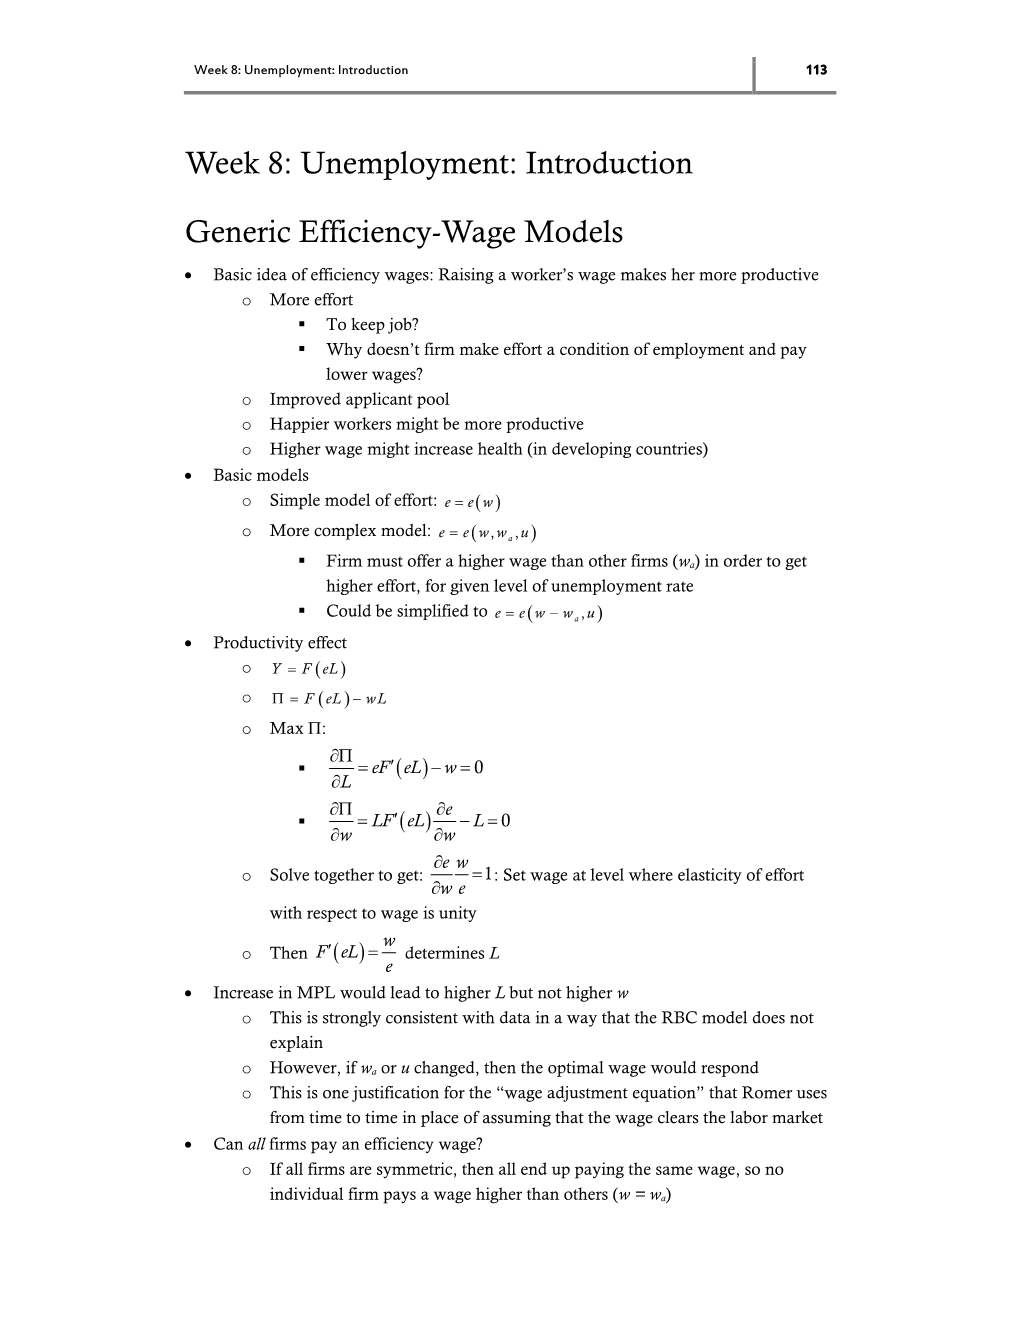 Week 8: Unemployment: Introduction Generic Efficiency-Wage Models